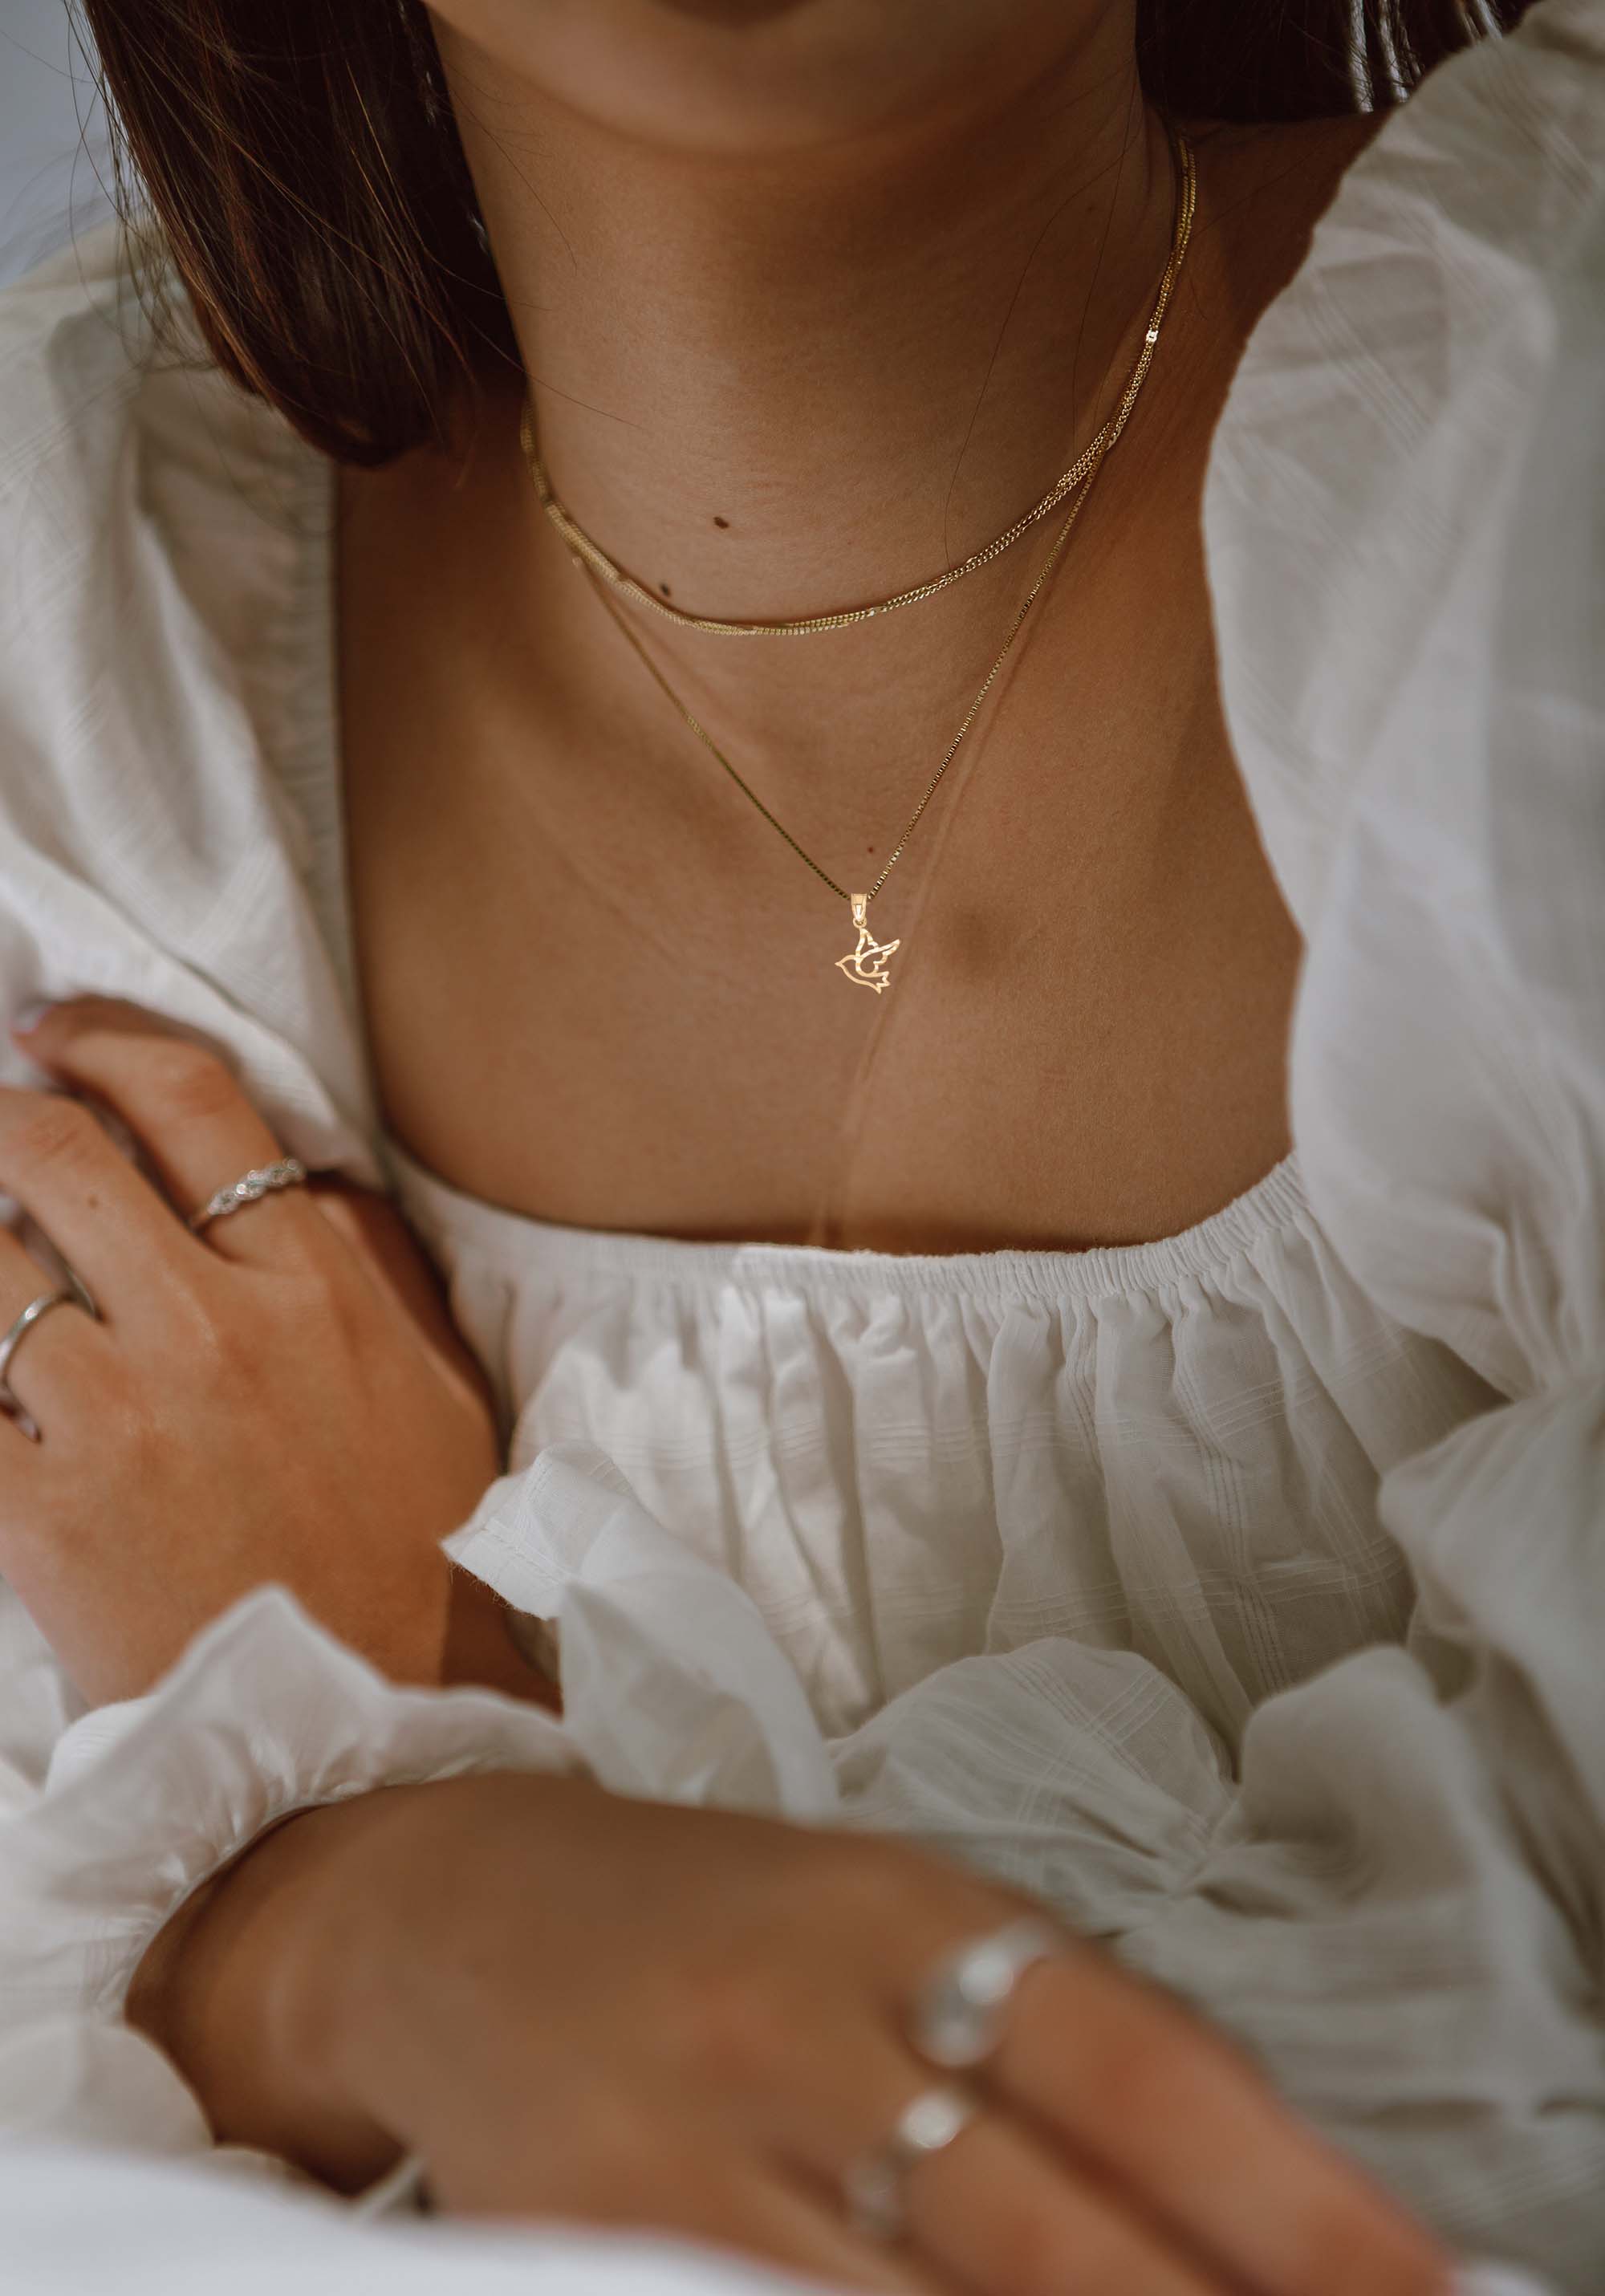 Solid Gold Dove Pendant - 10k or 14k